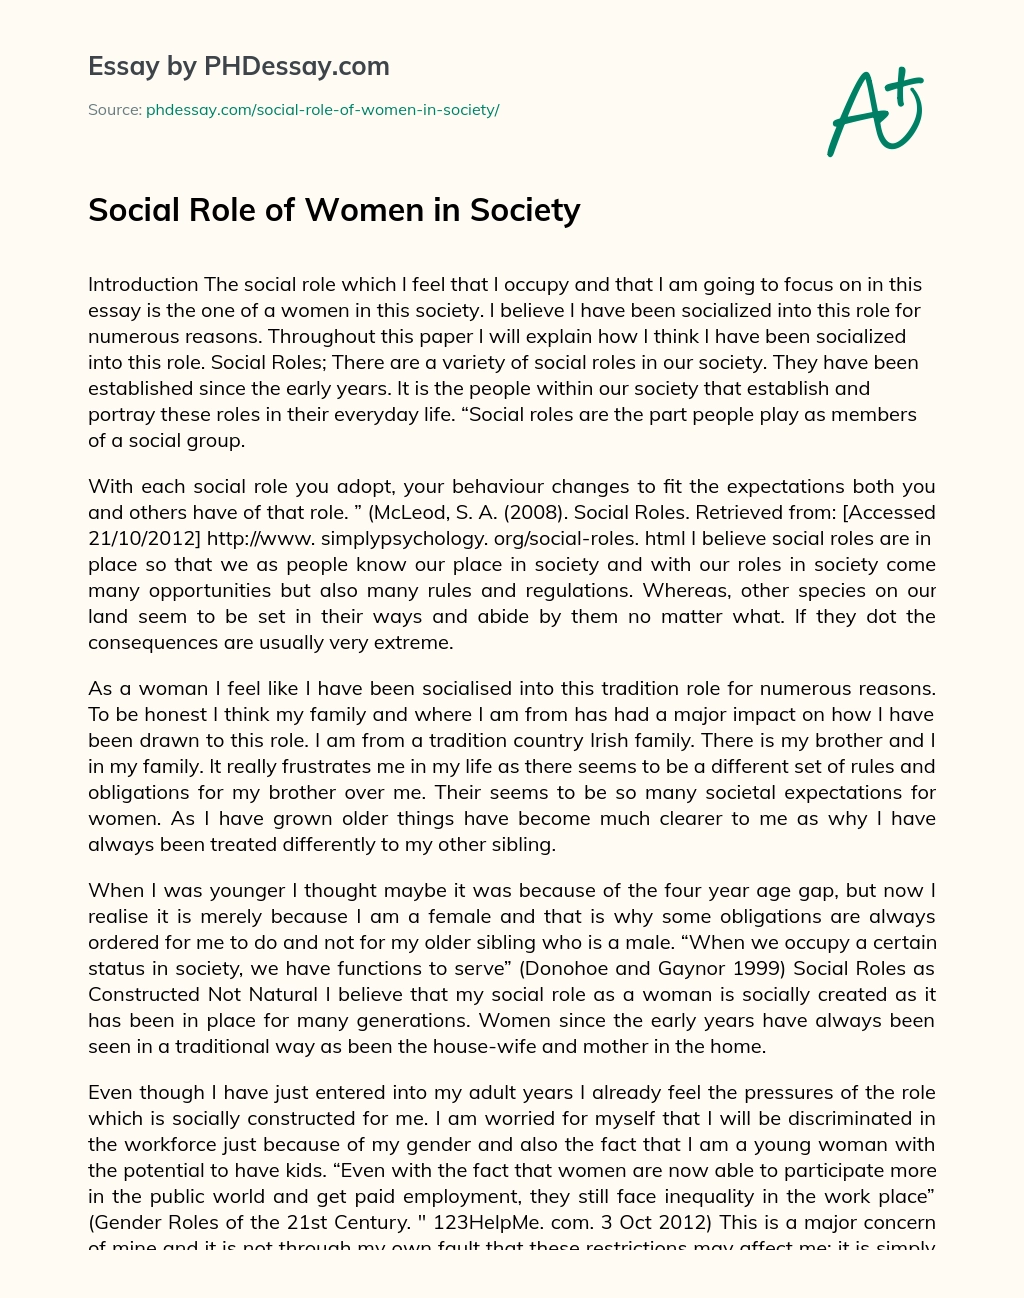 Social Role of Women in Society essay